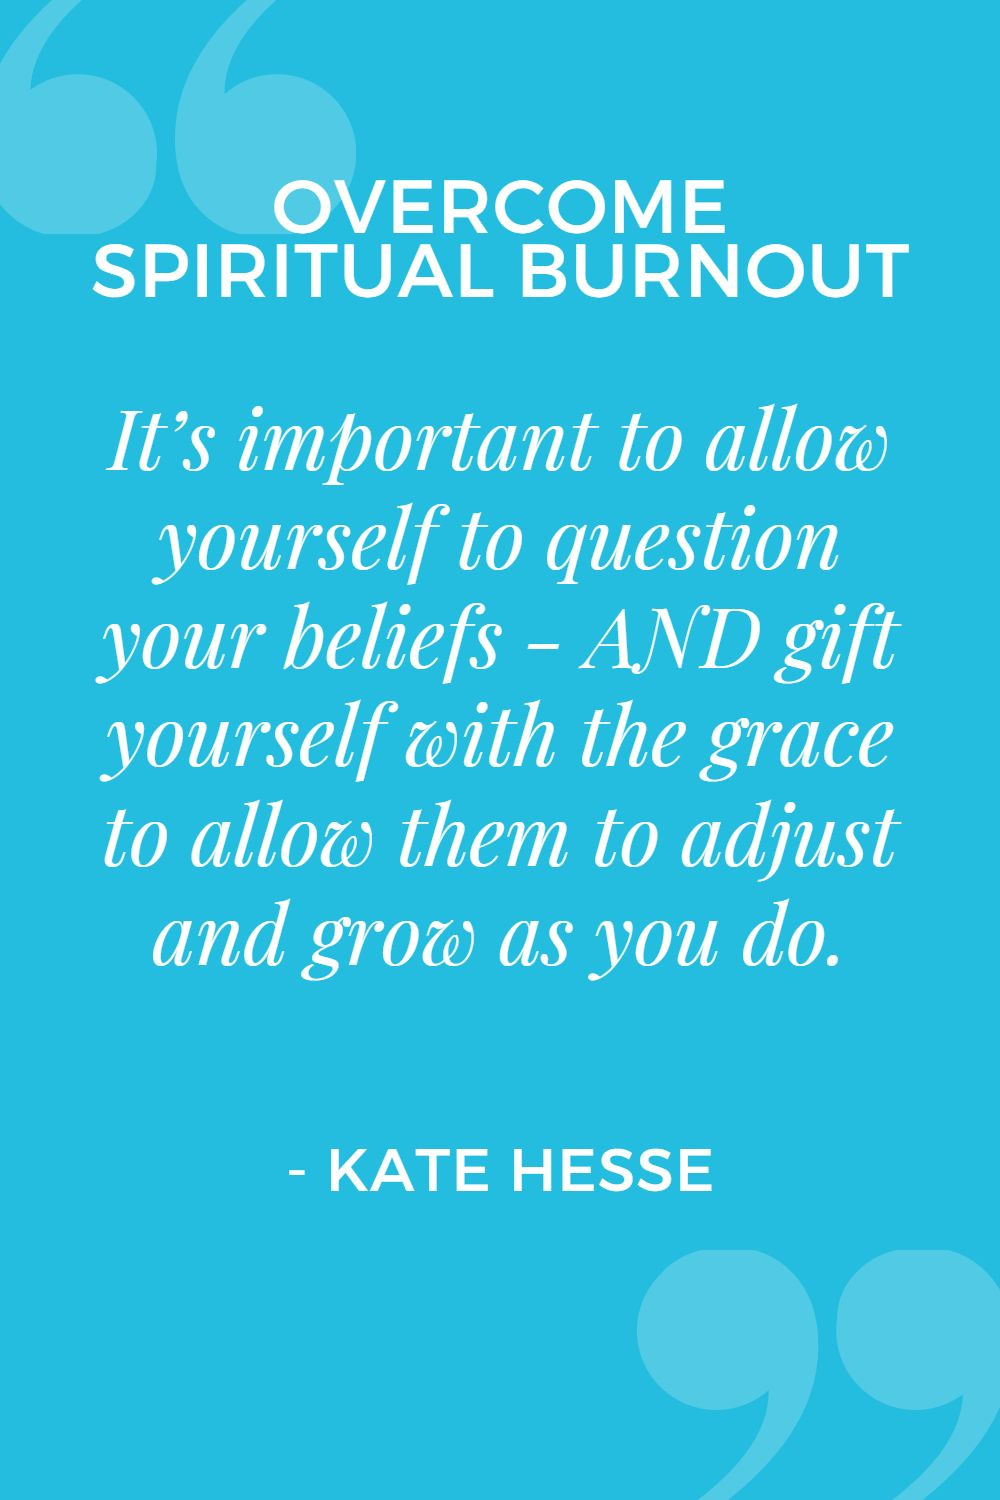 It's important to allow yourself to question your beliefs - AND gift yourself with the grace to allow them to adjust and grow as you do.